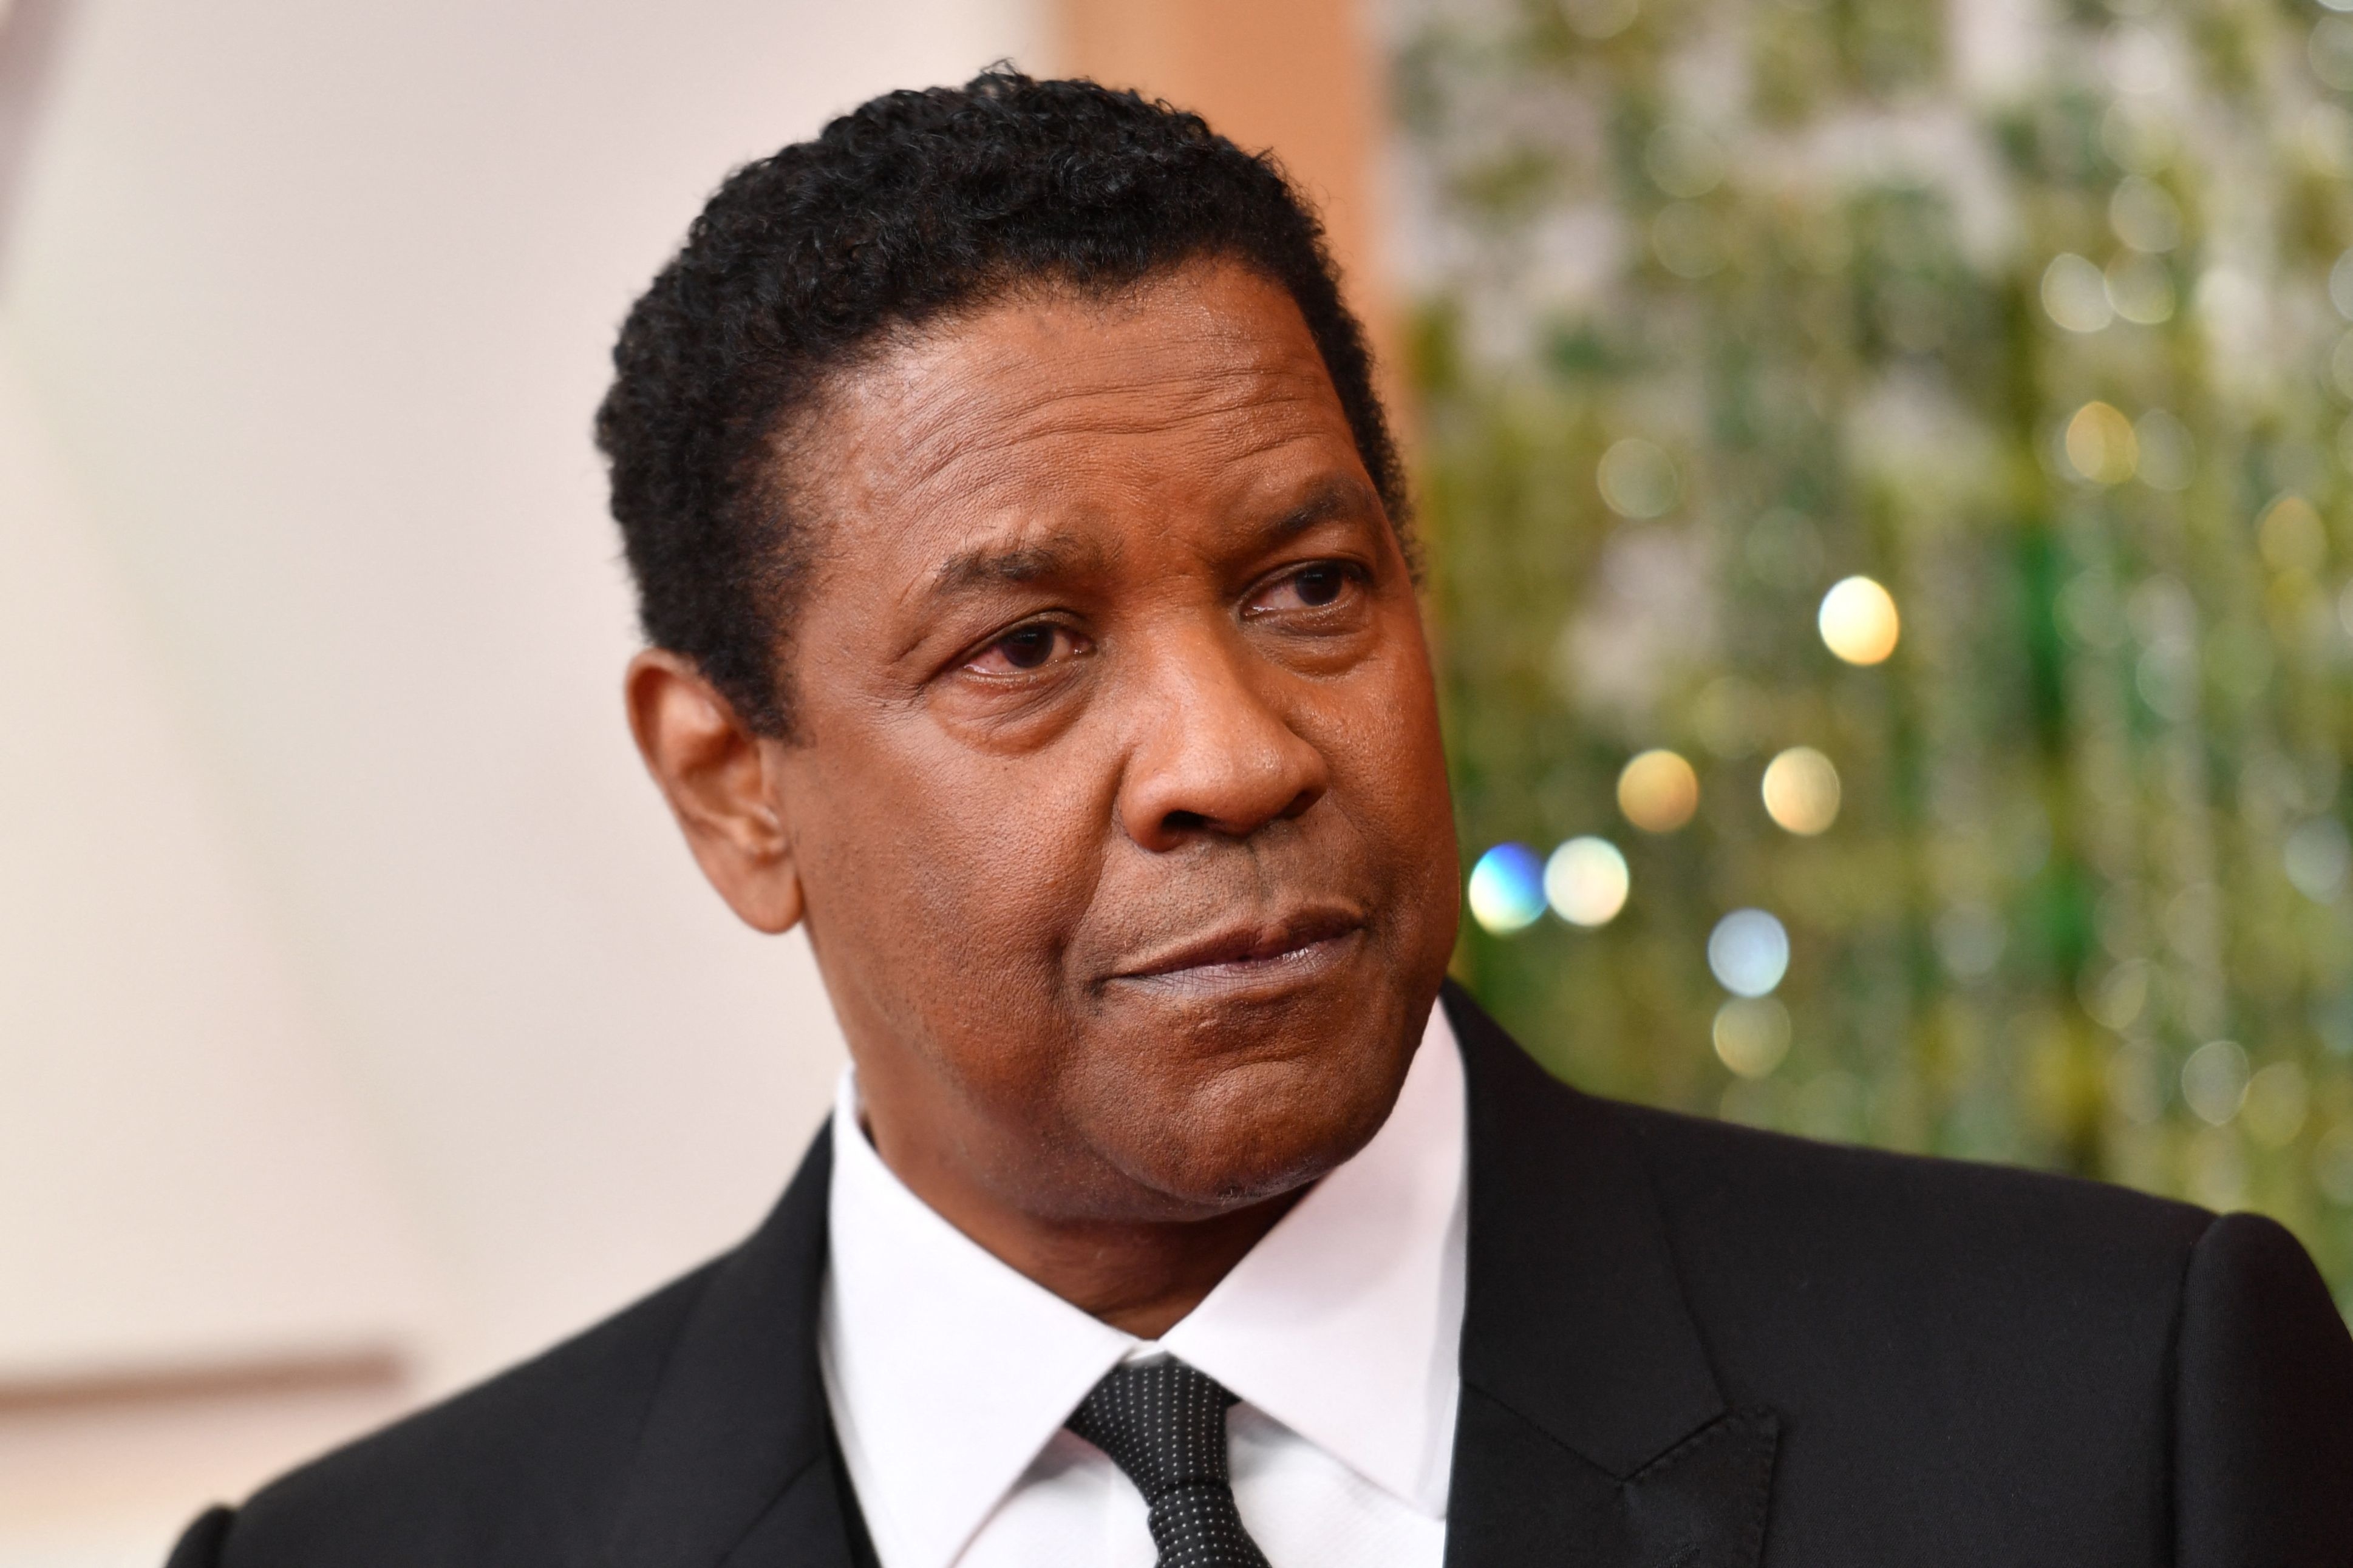 Denzel in a black suit and tie at an event